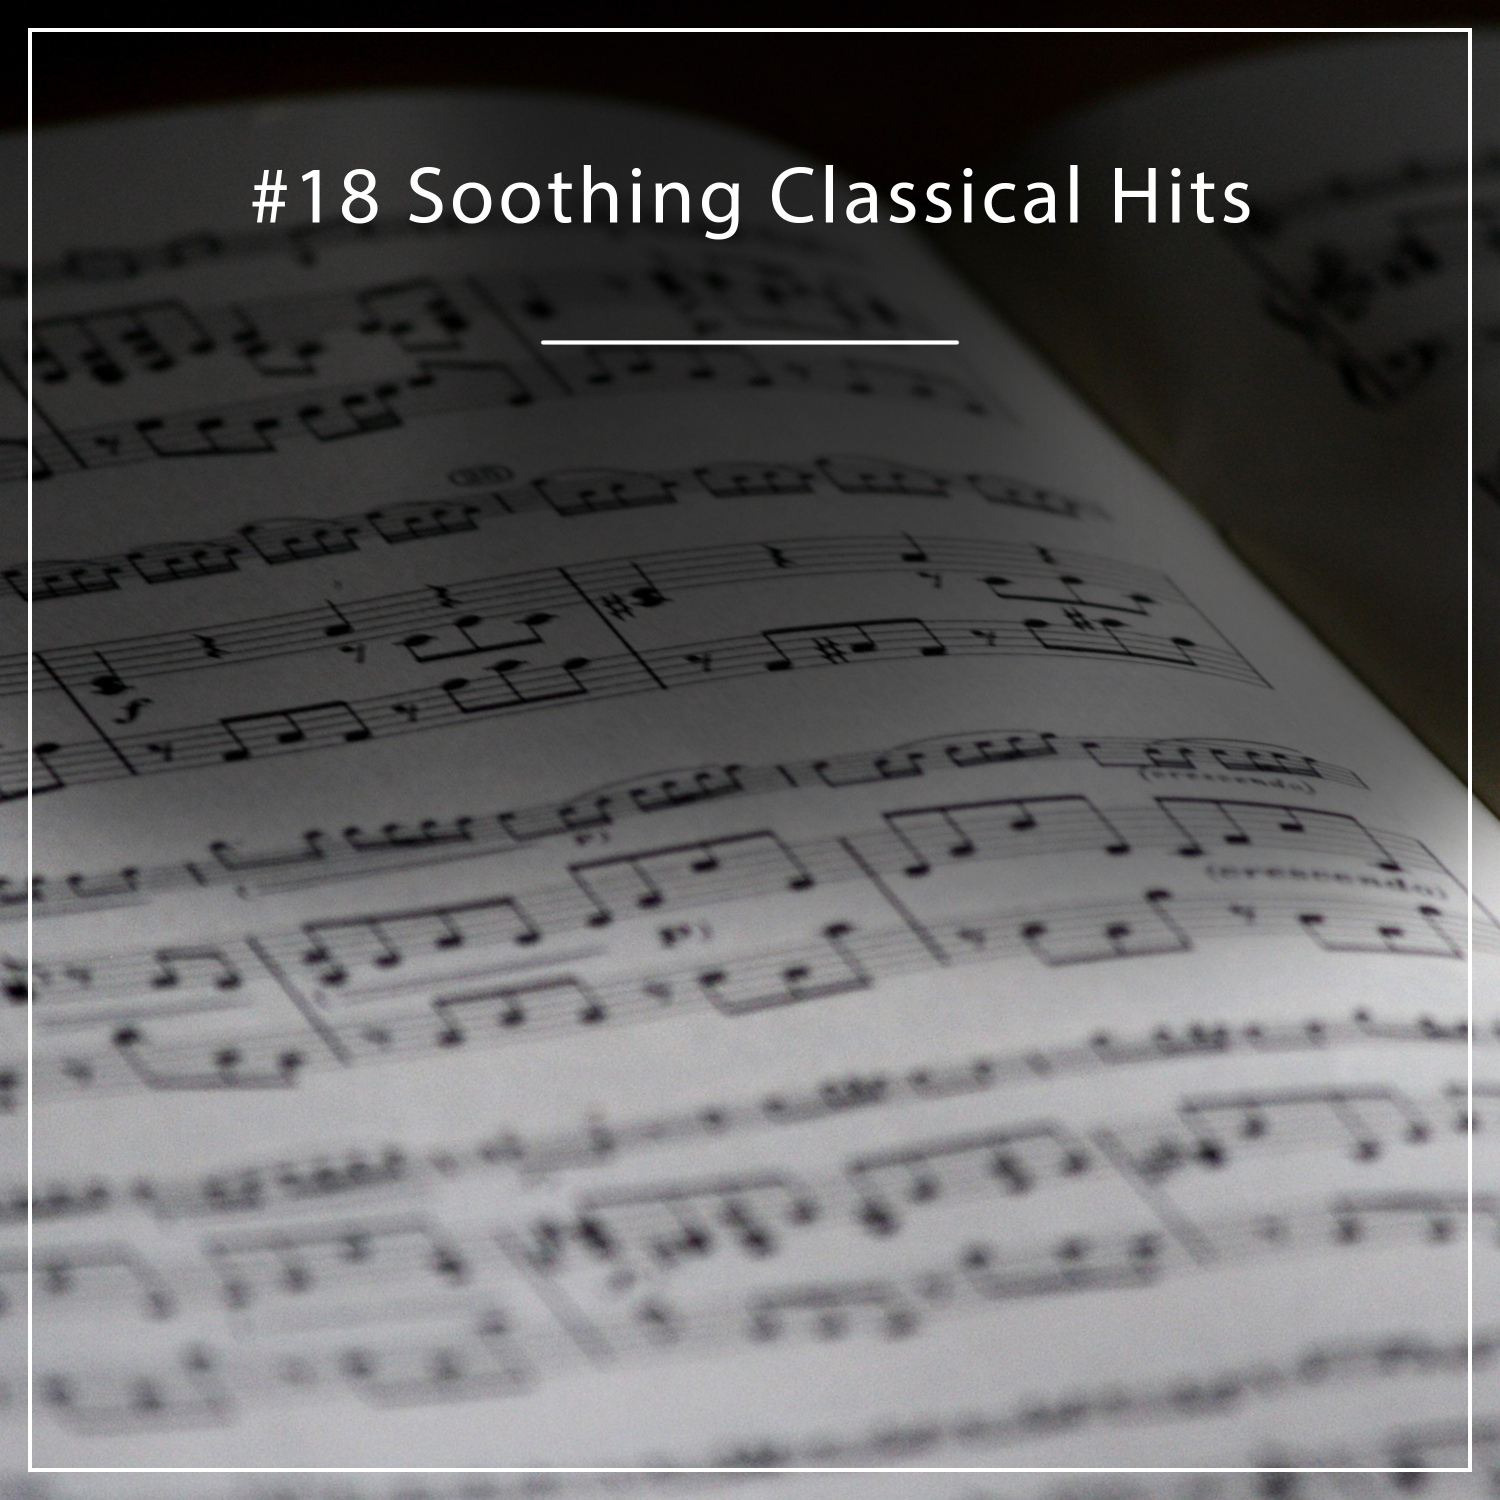 #18 Soothing Classical Hits